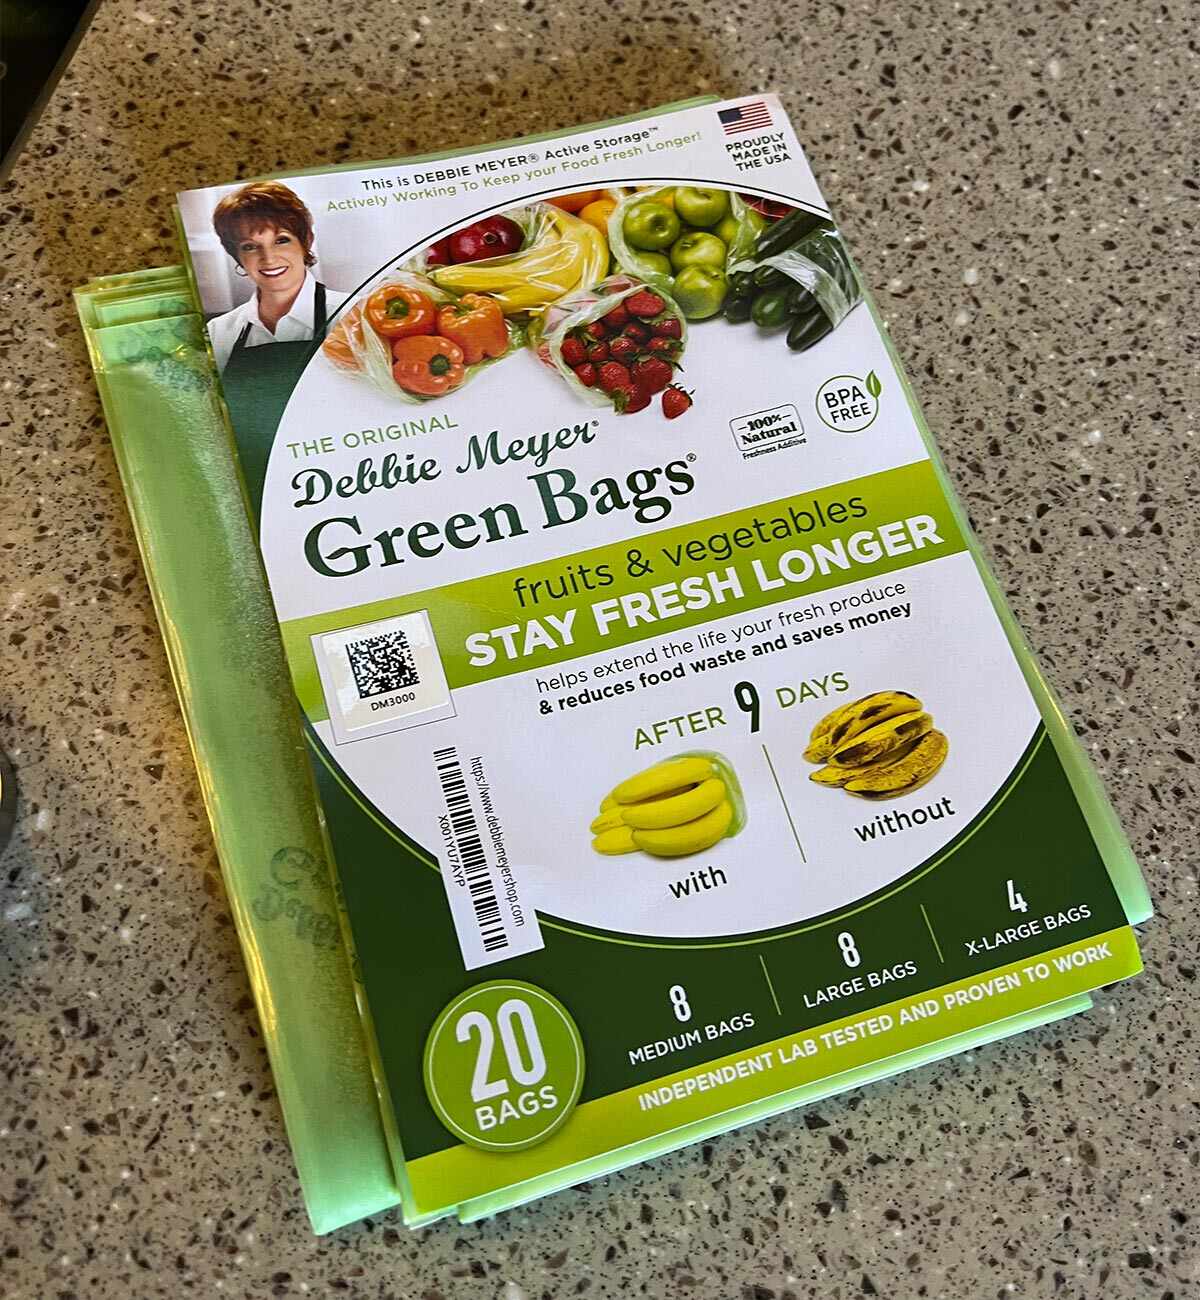 a packet of Debbie Meyer Green Bags sit on a counter top